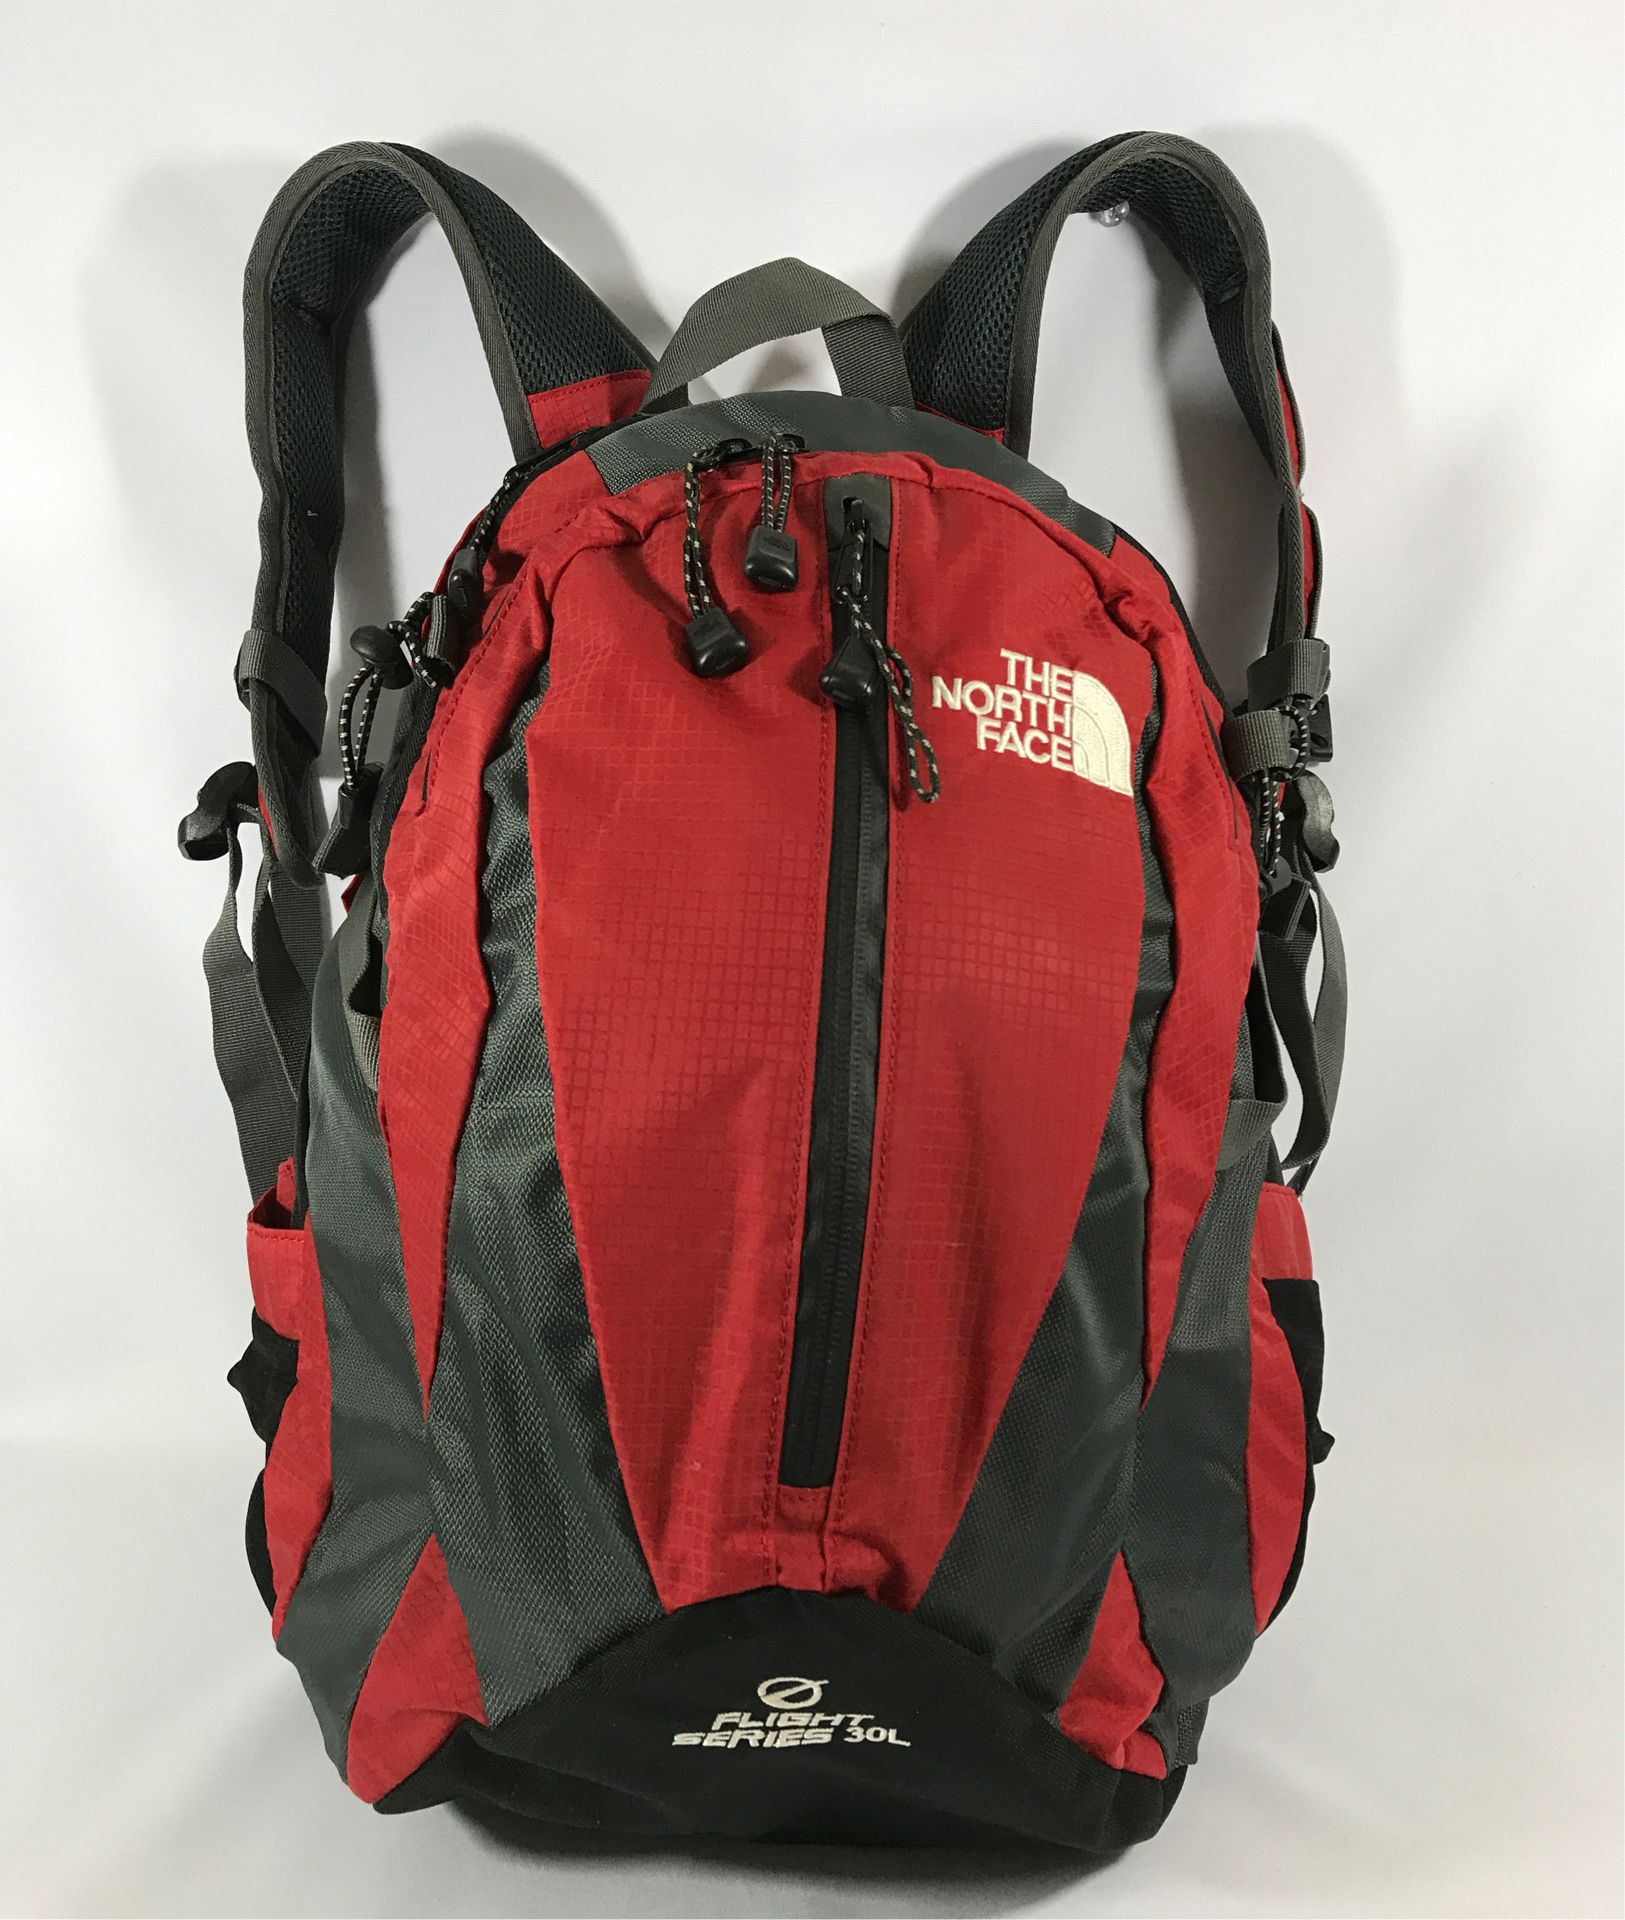 The North Face Flight Series 30L Rucksack Backpack w/Rain Cover